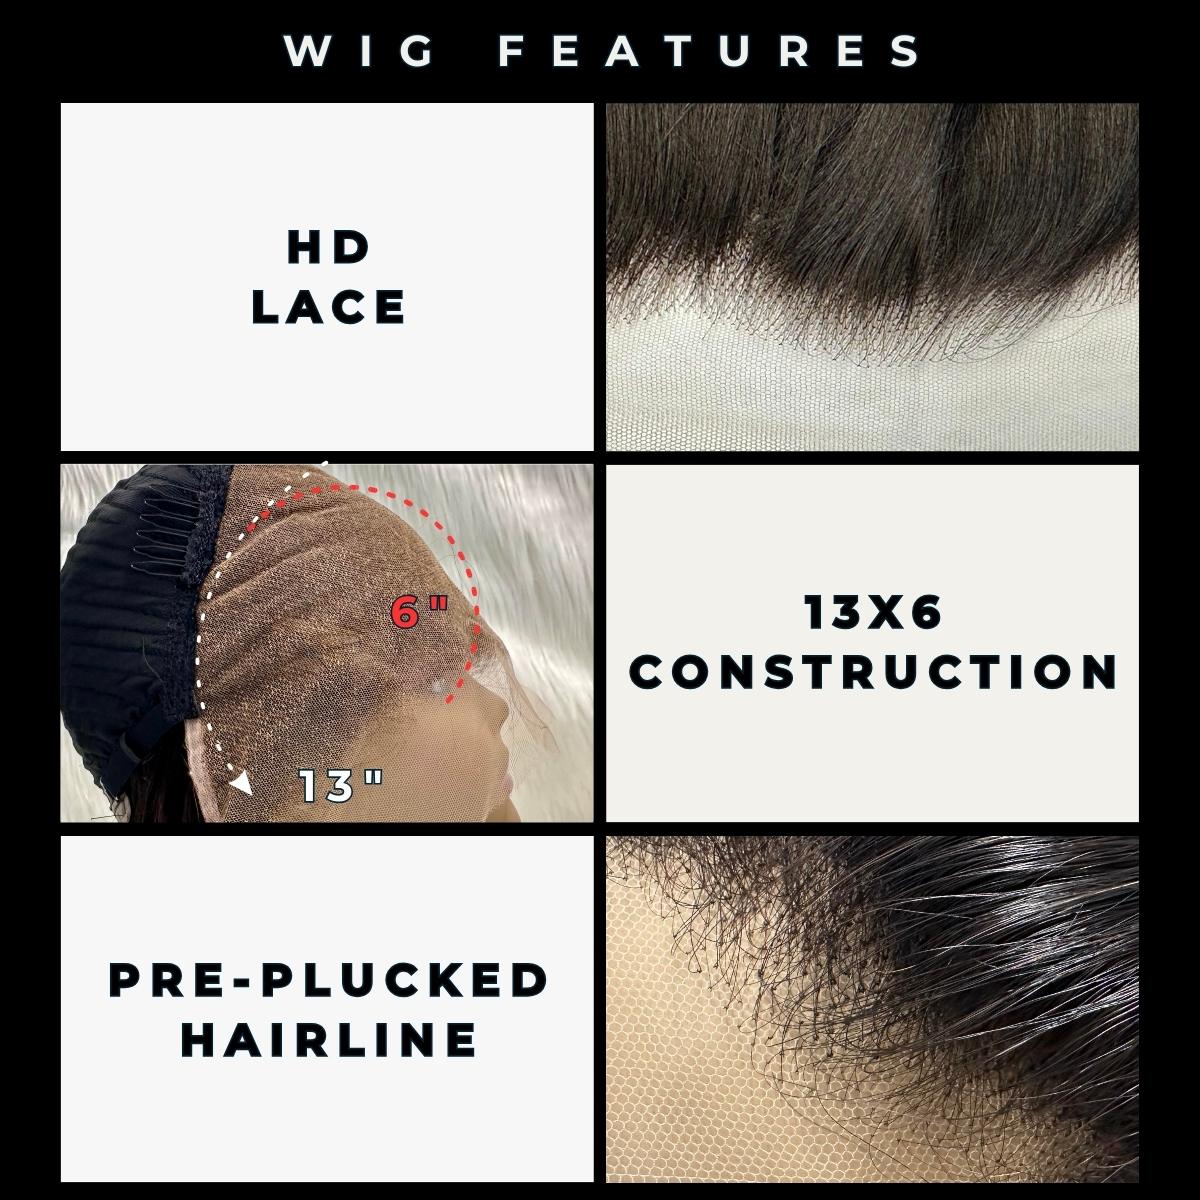 wig features-HD Lace- 13x6 construction- pre-plucked hairline